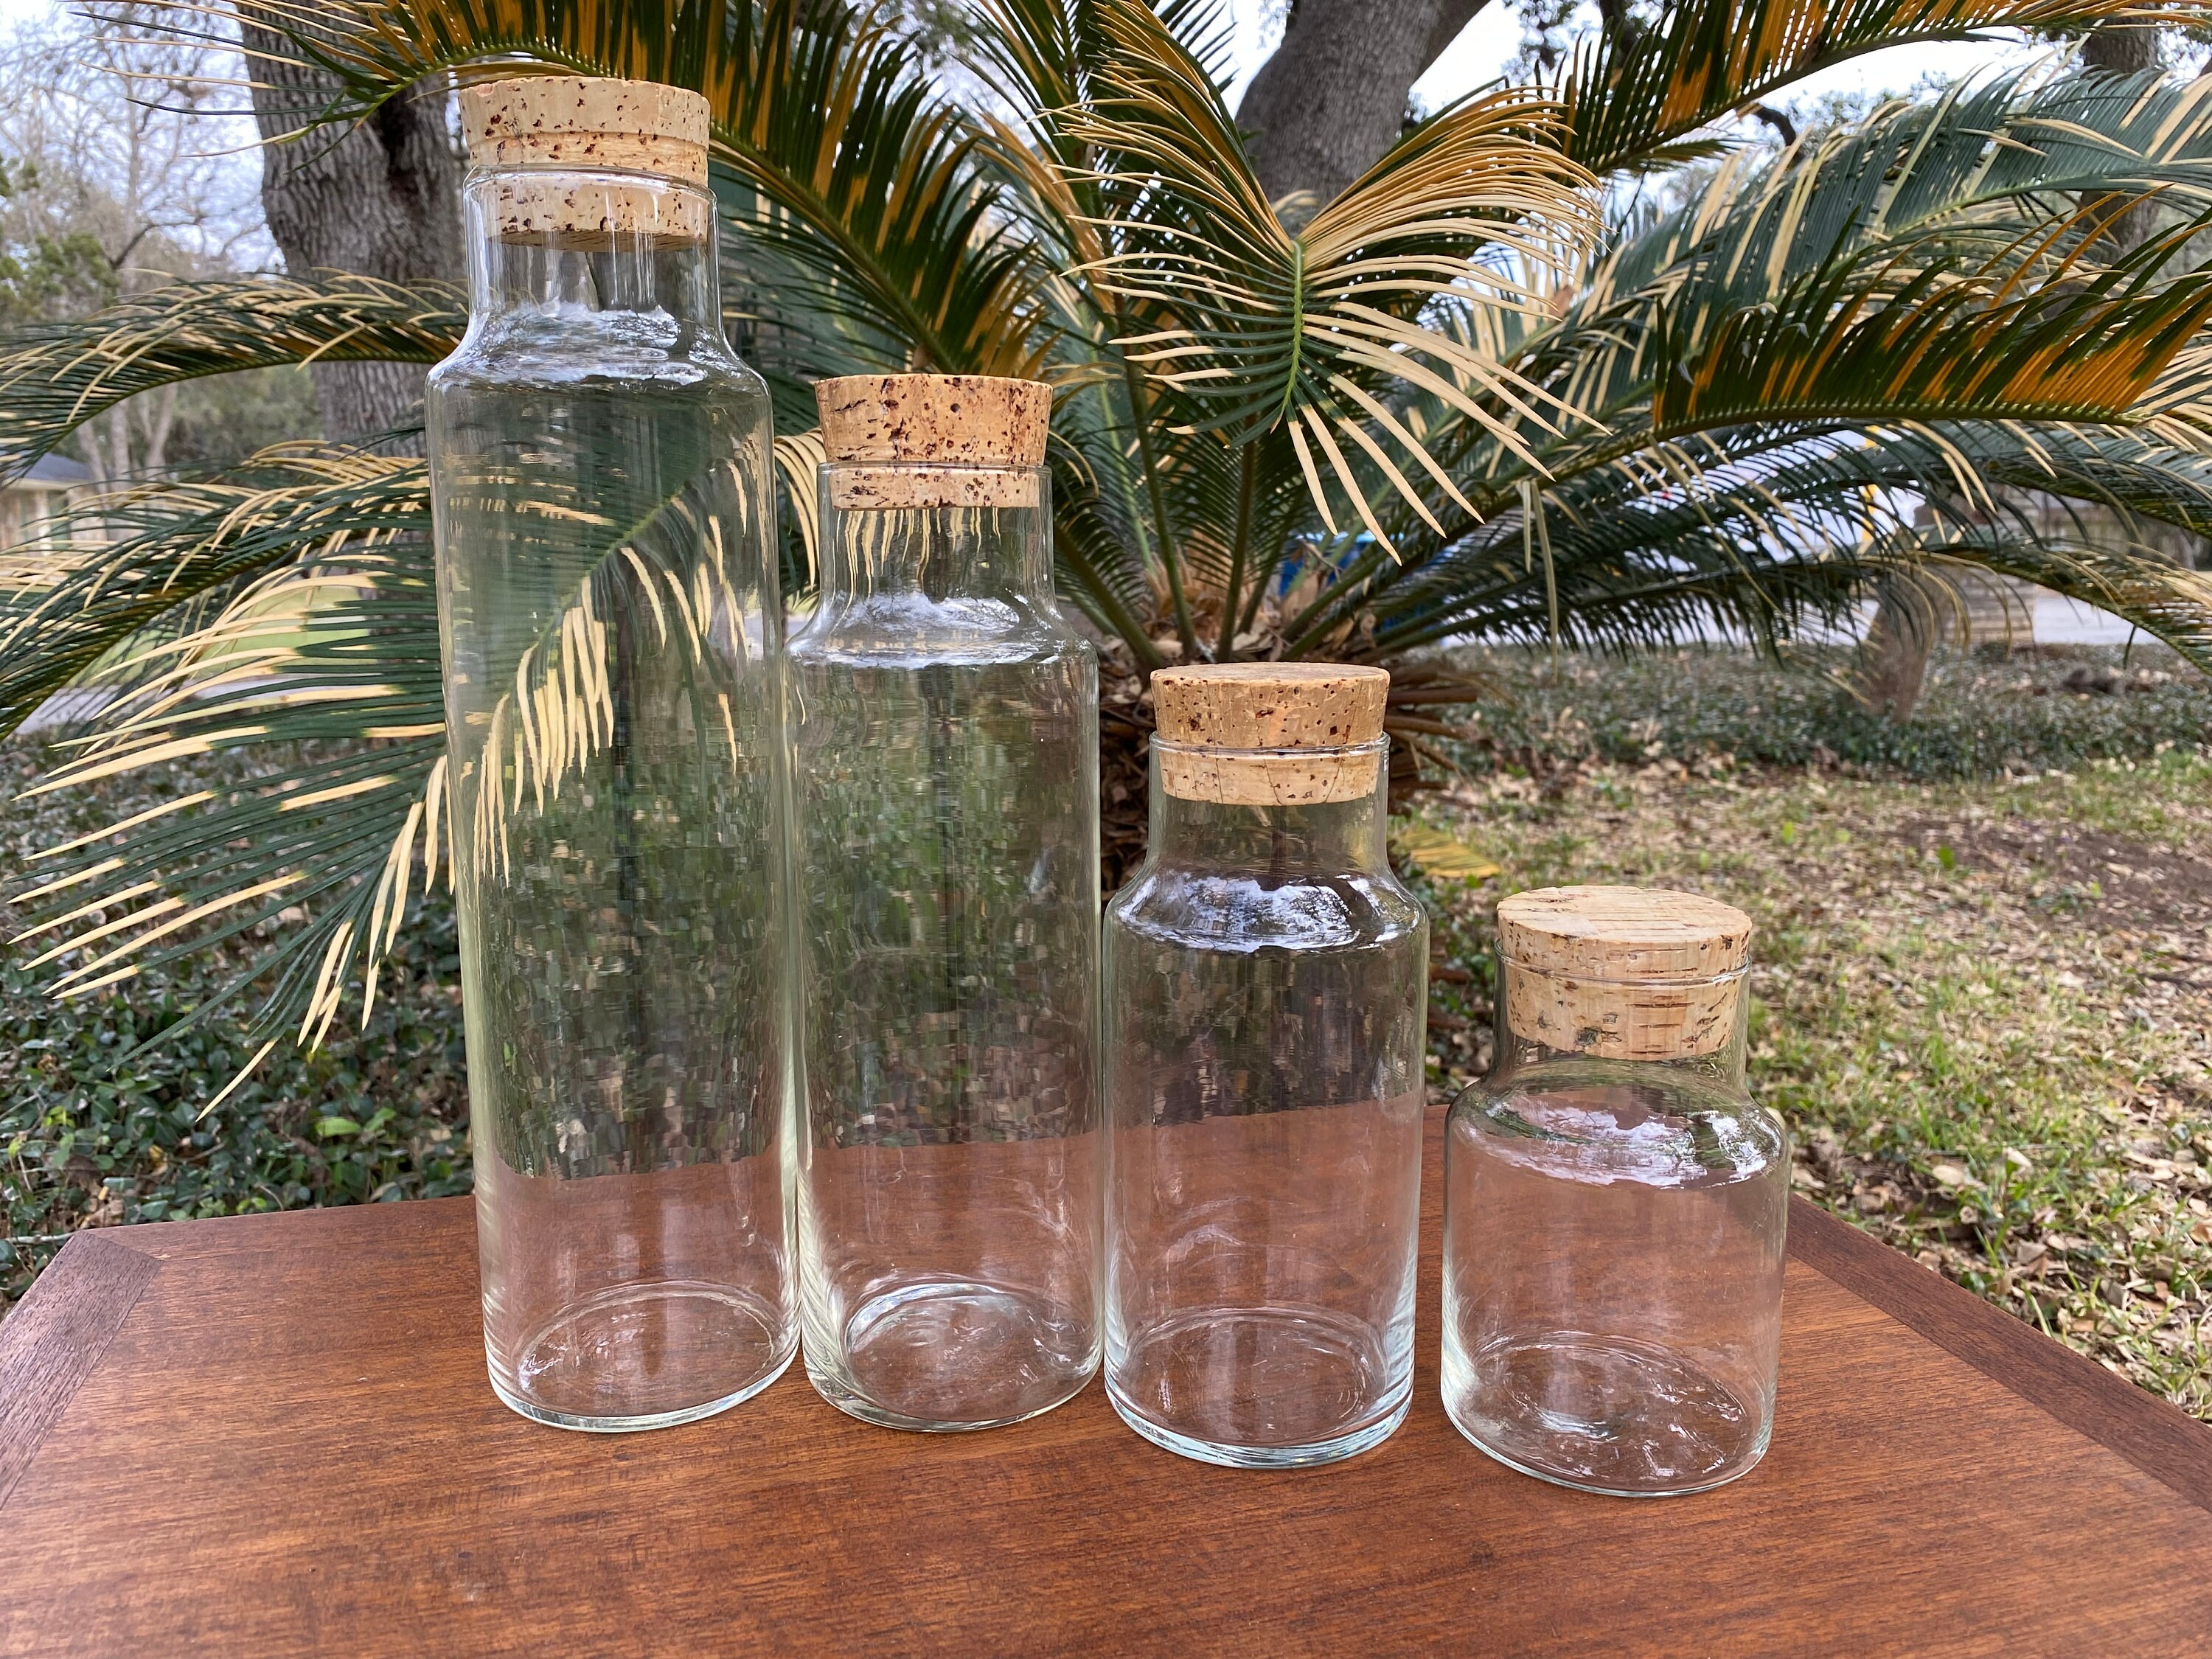 12 Pack Clear 6 Oz Glass Bottles with Cork Lids, Tiny Vintage Style Potion  Vases for Party Favors, DIY Crafts (180 ml) 